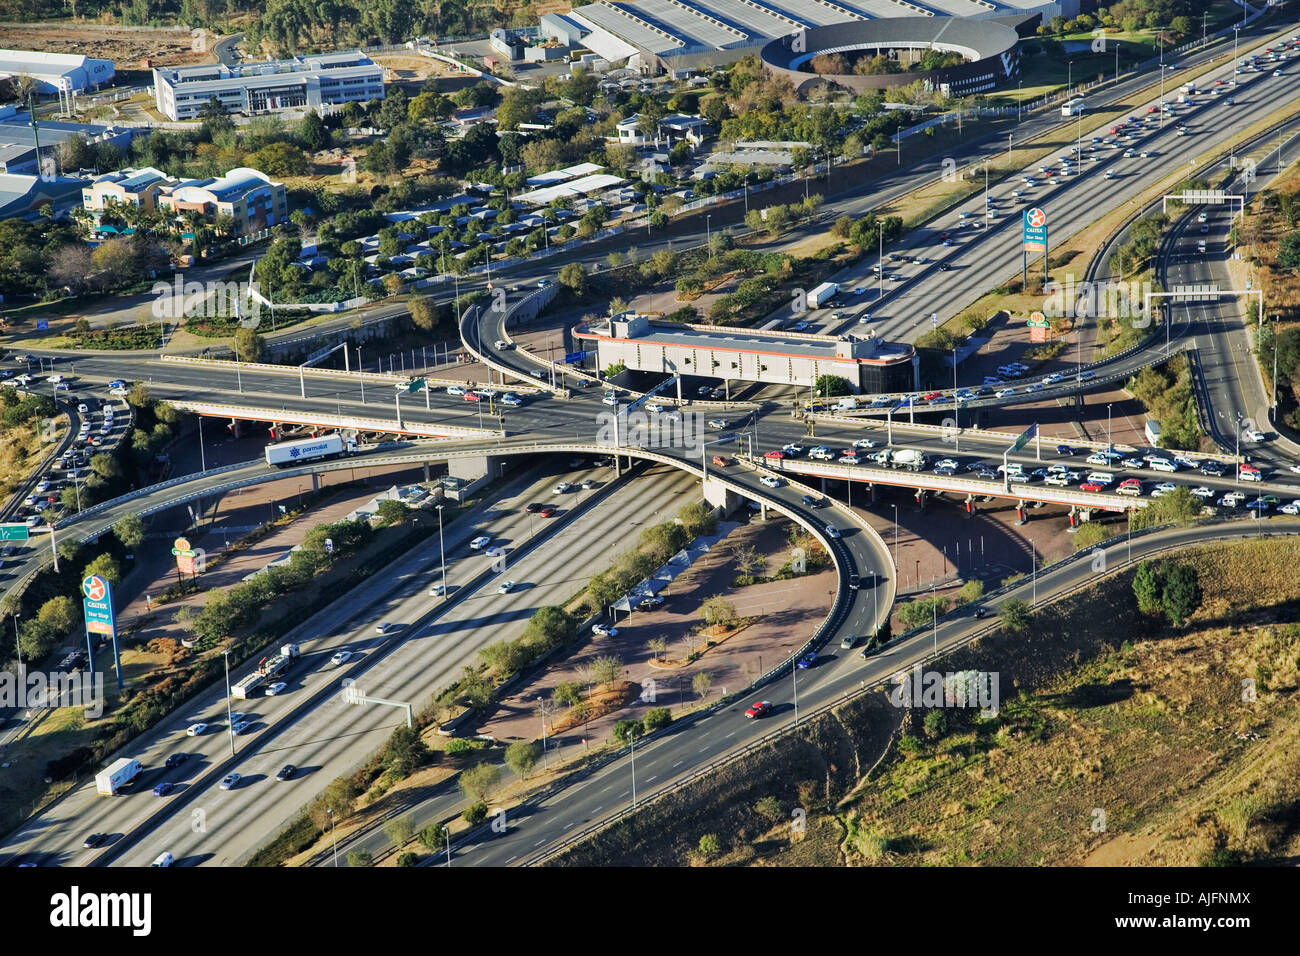 Aerial view of the New Road Bridge on the N1 Highway Gauteng Province South Africa Stock Photo